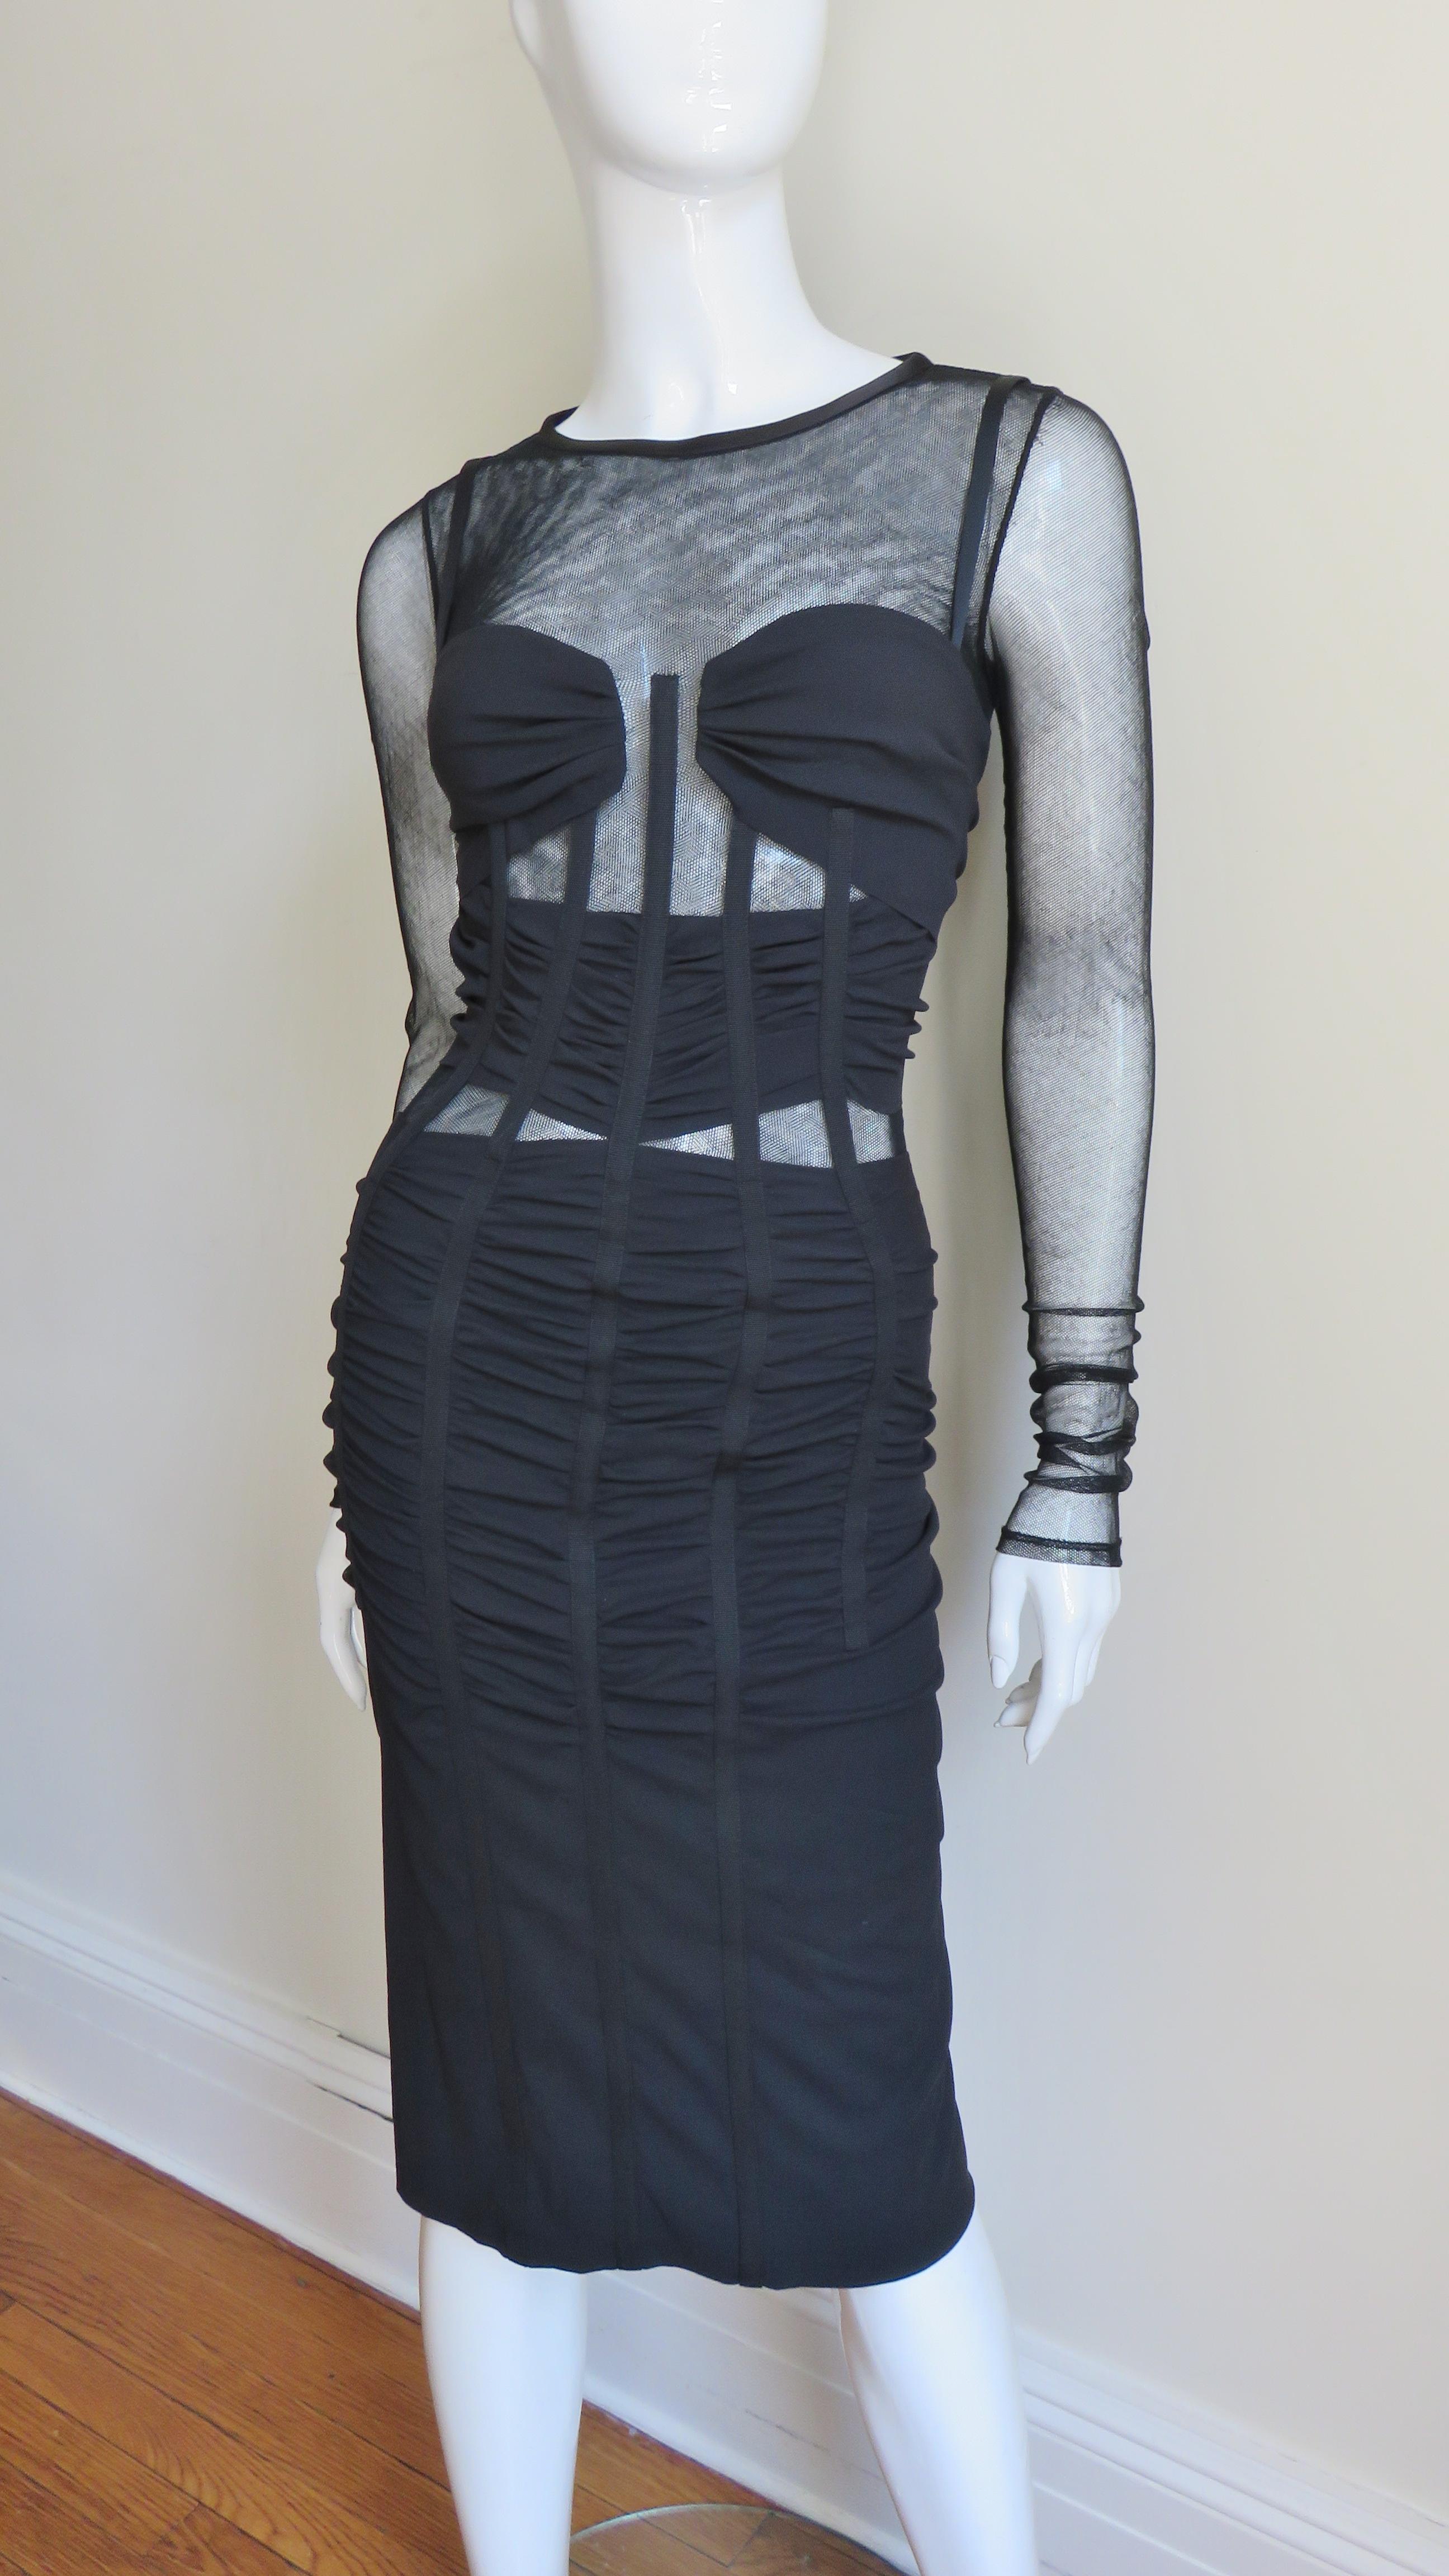 A fabulous sheer and silk jersey dress from Dolce & Gabbana.  A fitted long sleeve dress with ruched silk jersey over the mesh at the bust (which includes adjustable bra straps) and waist with mesh peeking out above and below it.  The bodice is